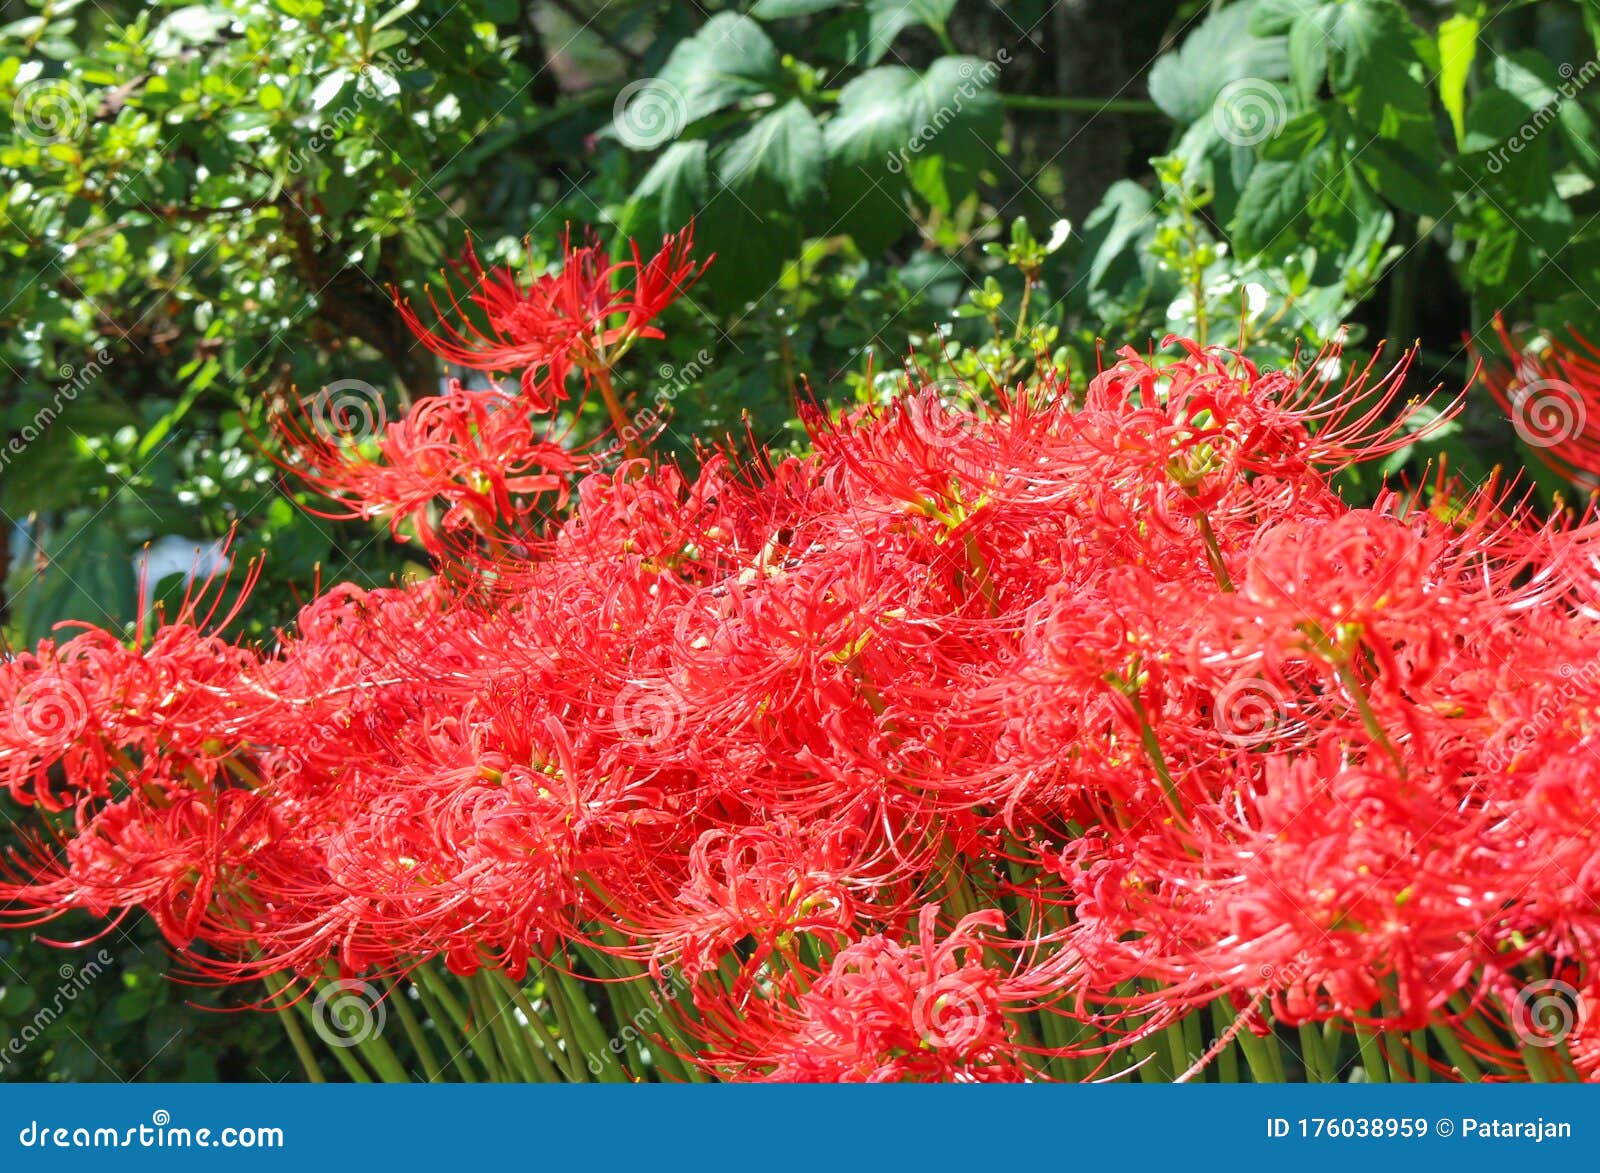 japanese red spider lily or lycoris radiata flower in the park